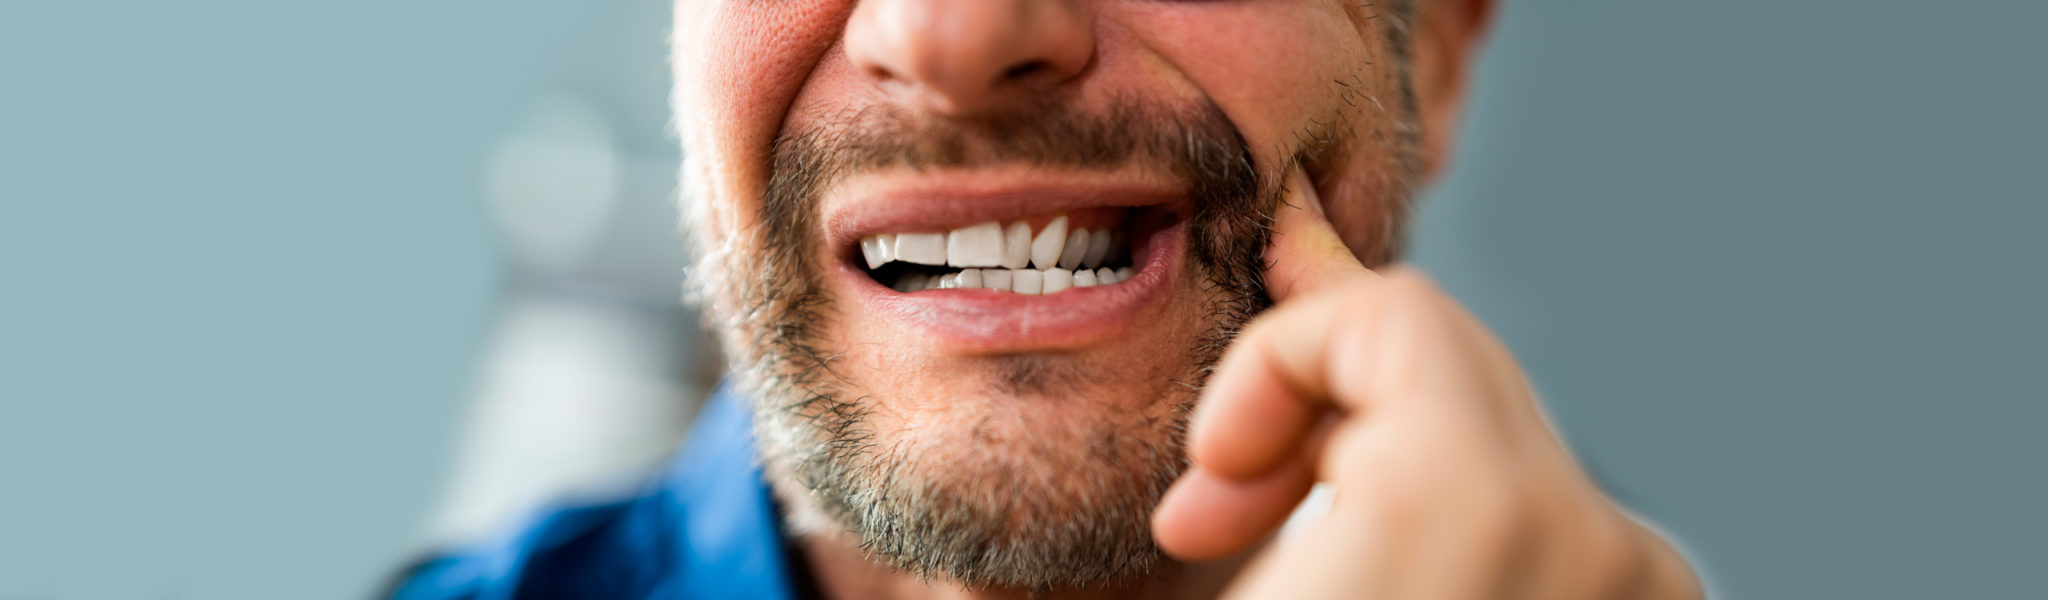 Why smoking can cause tooth decay and other disorders